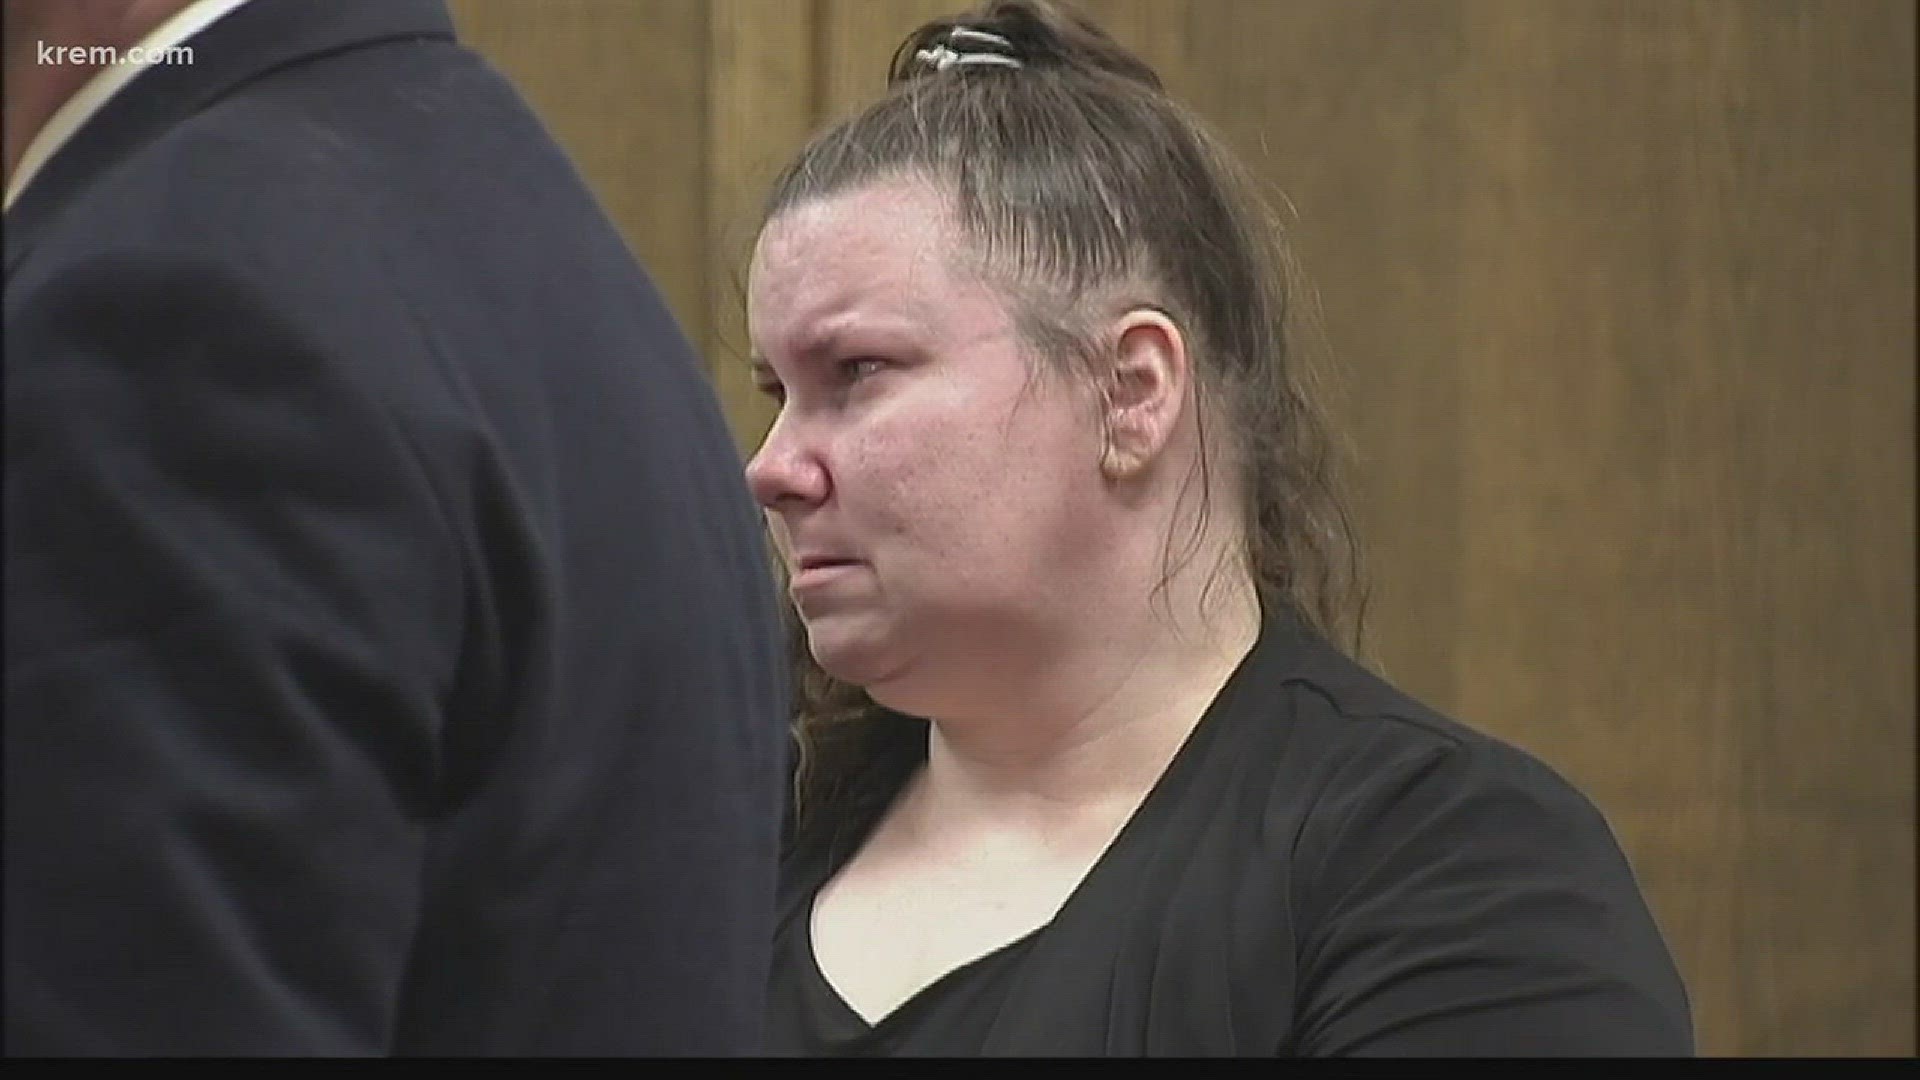 The jury found Martie Soderberg guilty of attempted first degree murder and solicitation to commit first degree murder. (3-23-18)